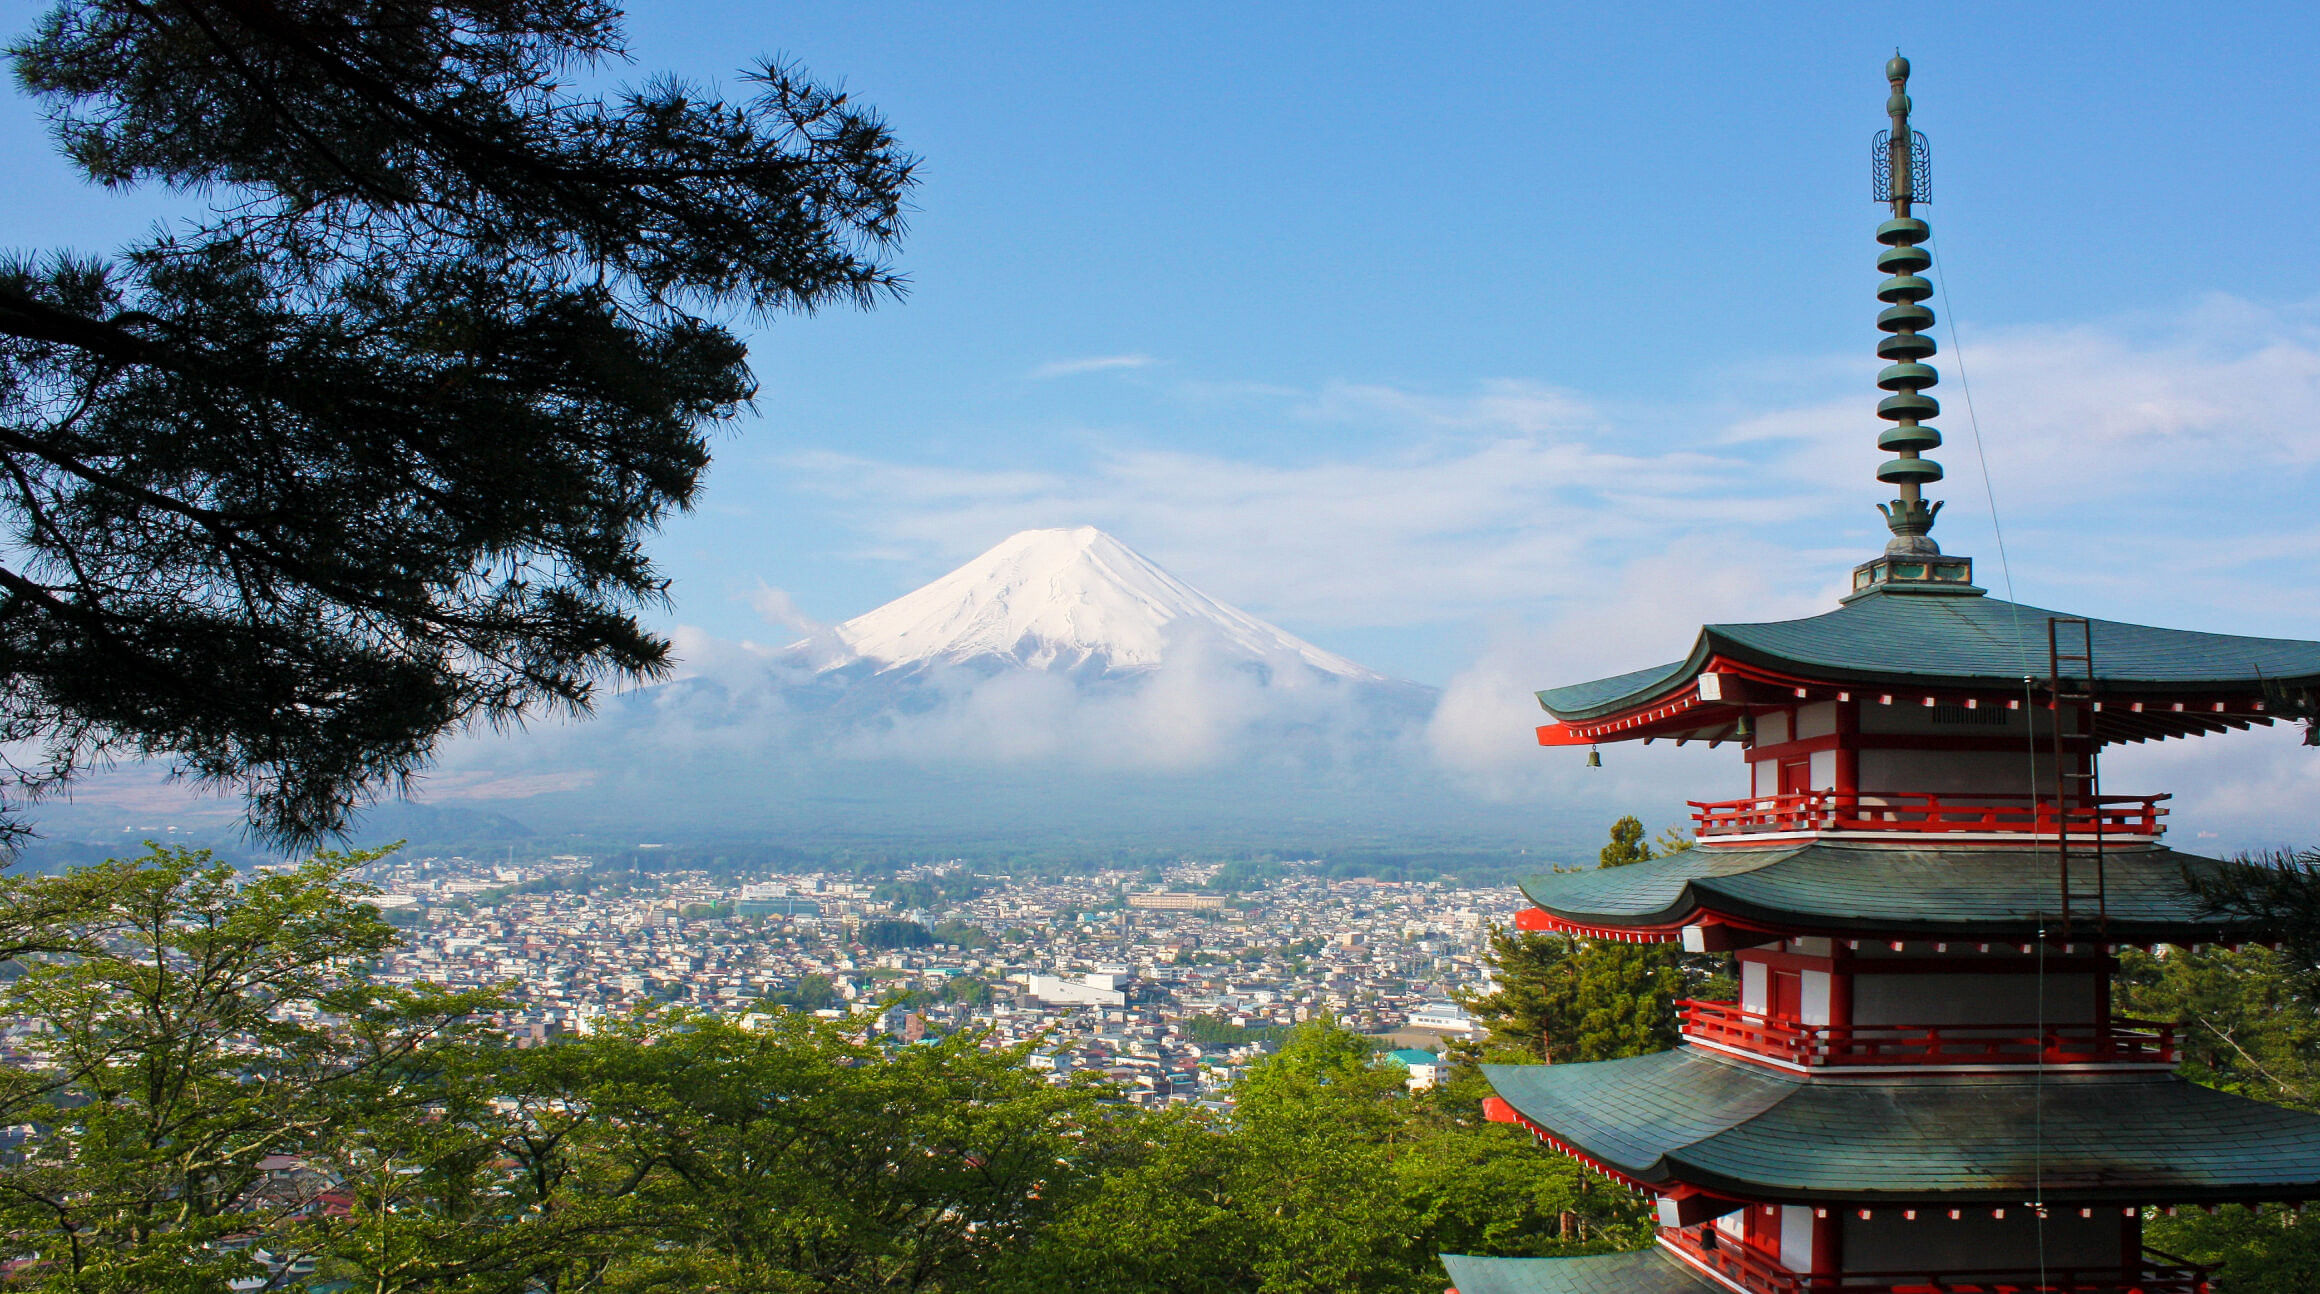 temple with Mount Fuji in the background, Japan